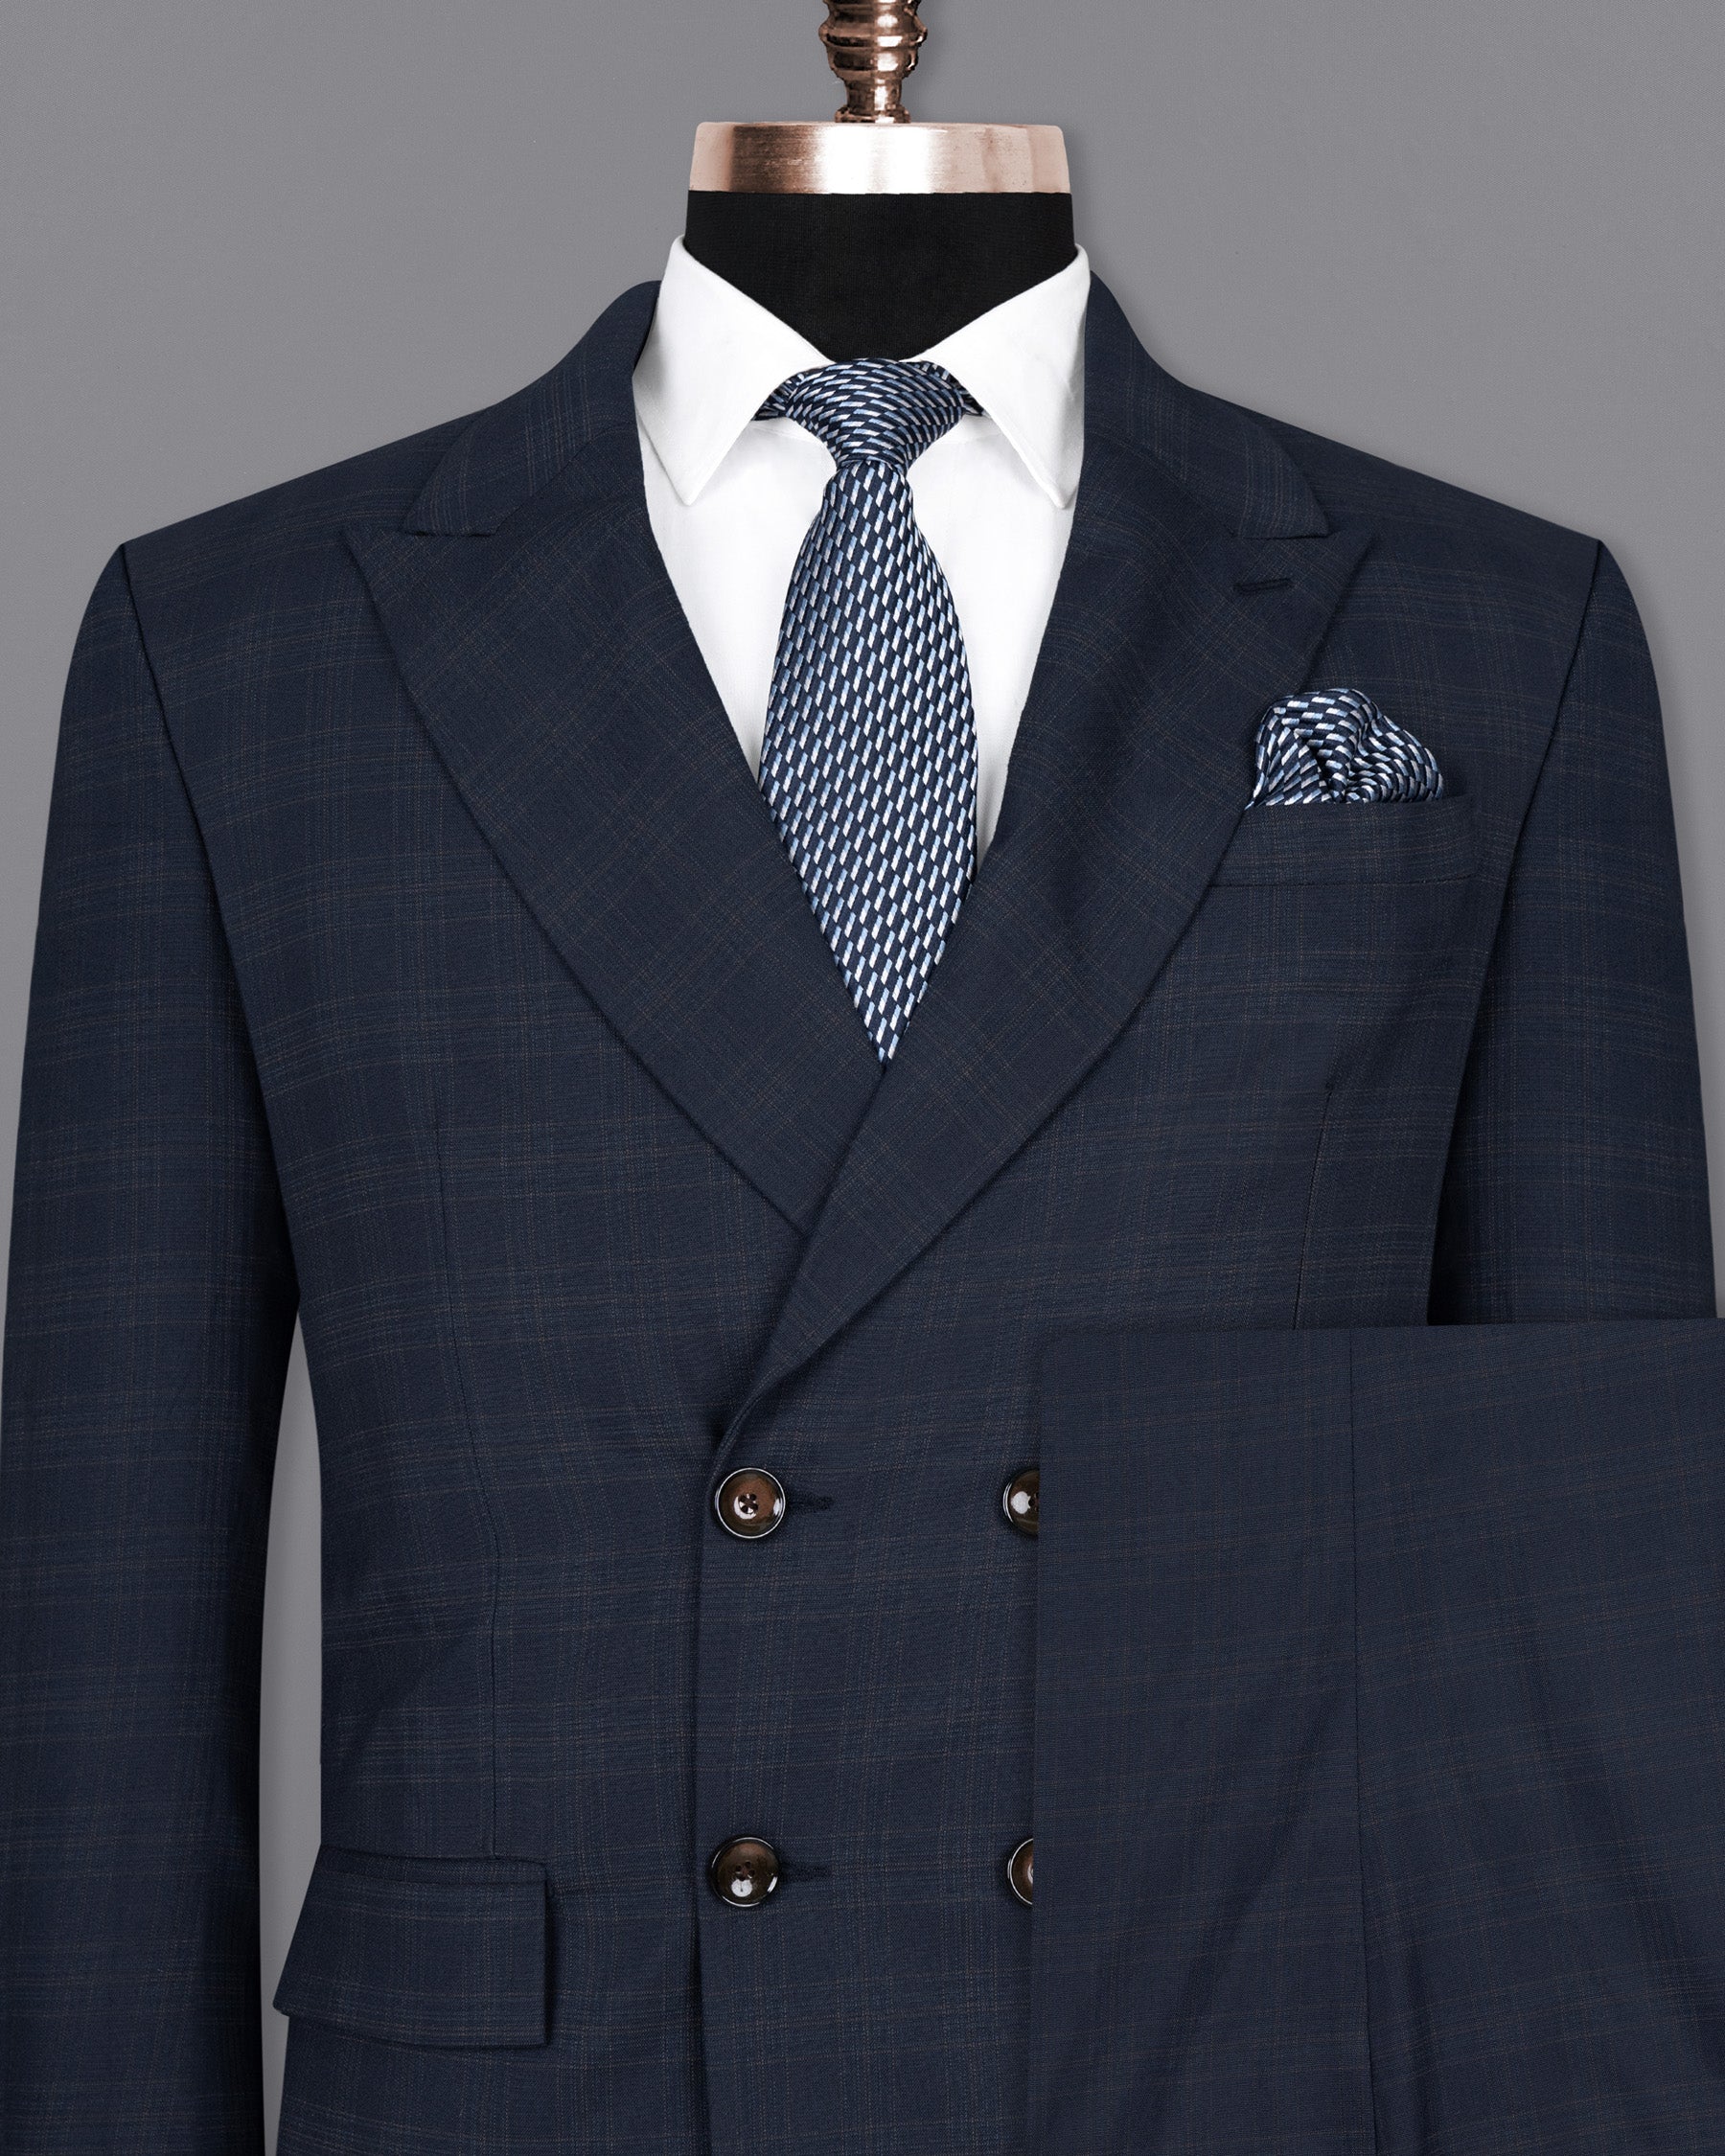 Charade Blue Plaid Double Breasted Wool Rich Suit ST1420-DB-4B-36, ST1420-DB-4B-38, ST1420-DB-4B-40, ST1420-DB-4B-42, ST1420-DB-4B-44, ST1420-DB-4B-46, ST1420-DB-4B-48, ST1420-DB-4B-50, ST1420-DB-4B-52, ST1420-DB-4B-54, ST1420-DB-4B-56, ST1420-DB-4B-58, ST1420-DB-4B-60